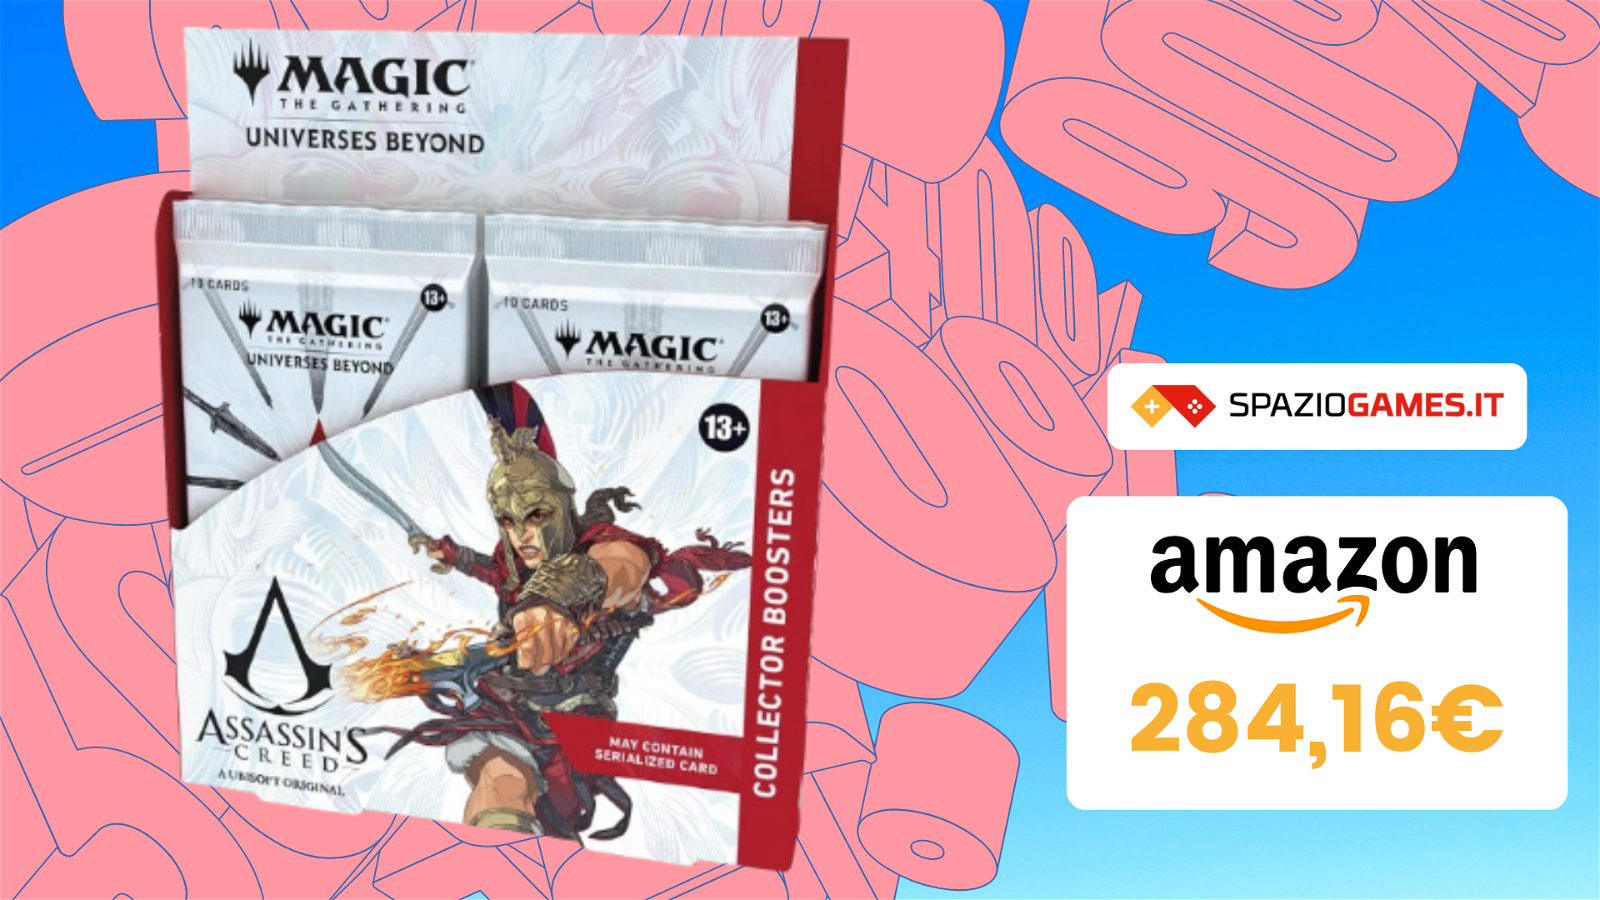 WOW! Collector Booster di Magic: The Gathering a tema Assassin’s Creed a soli 284€!